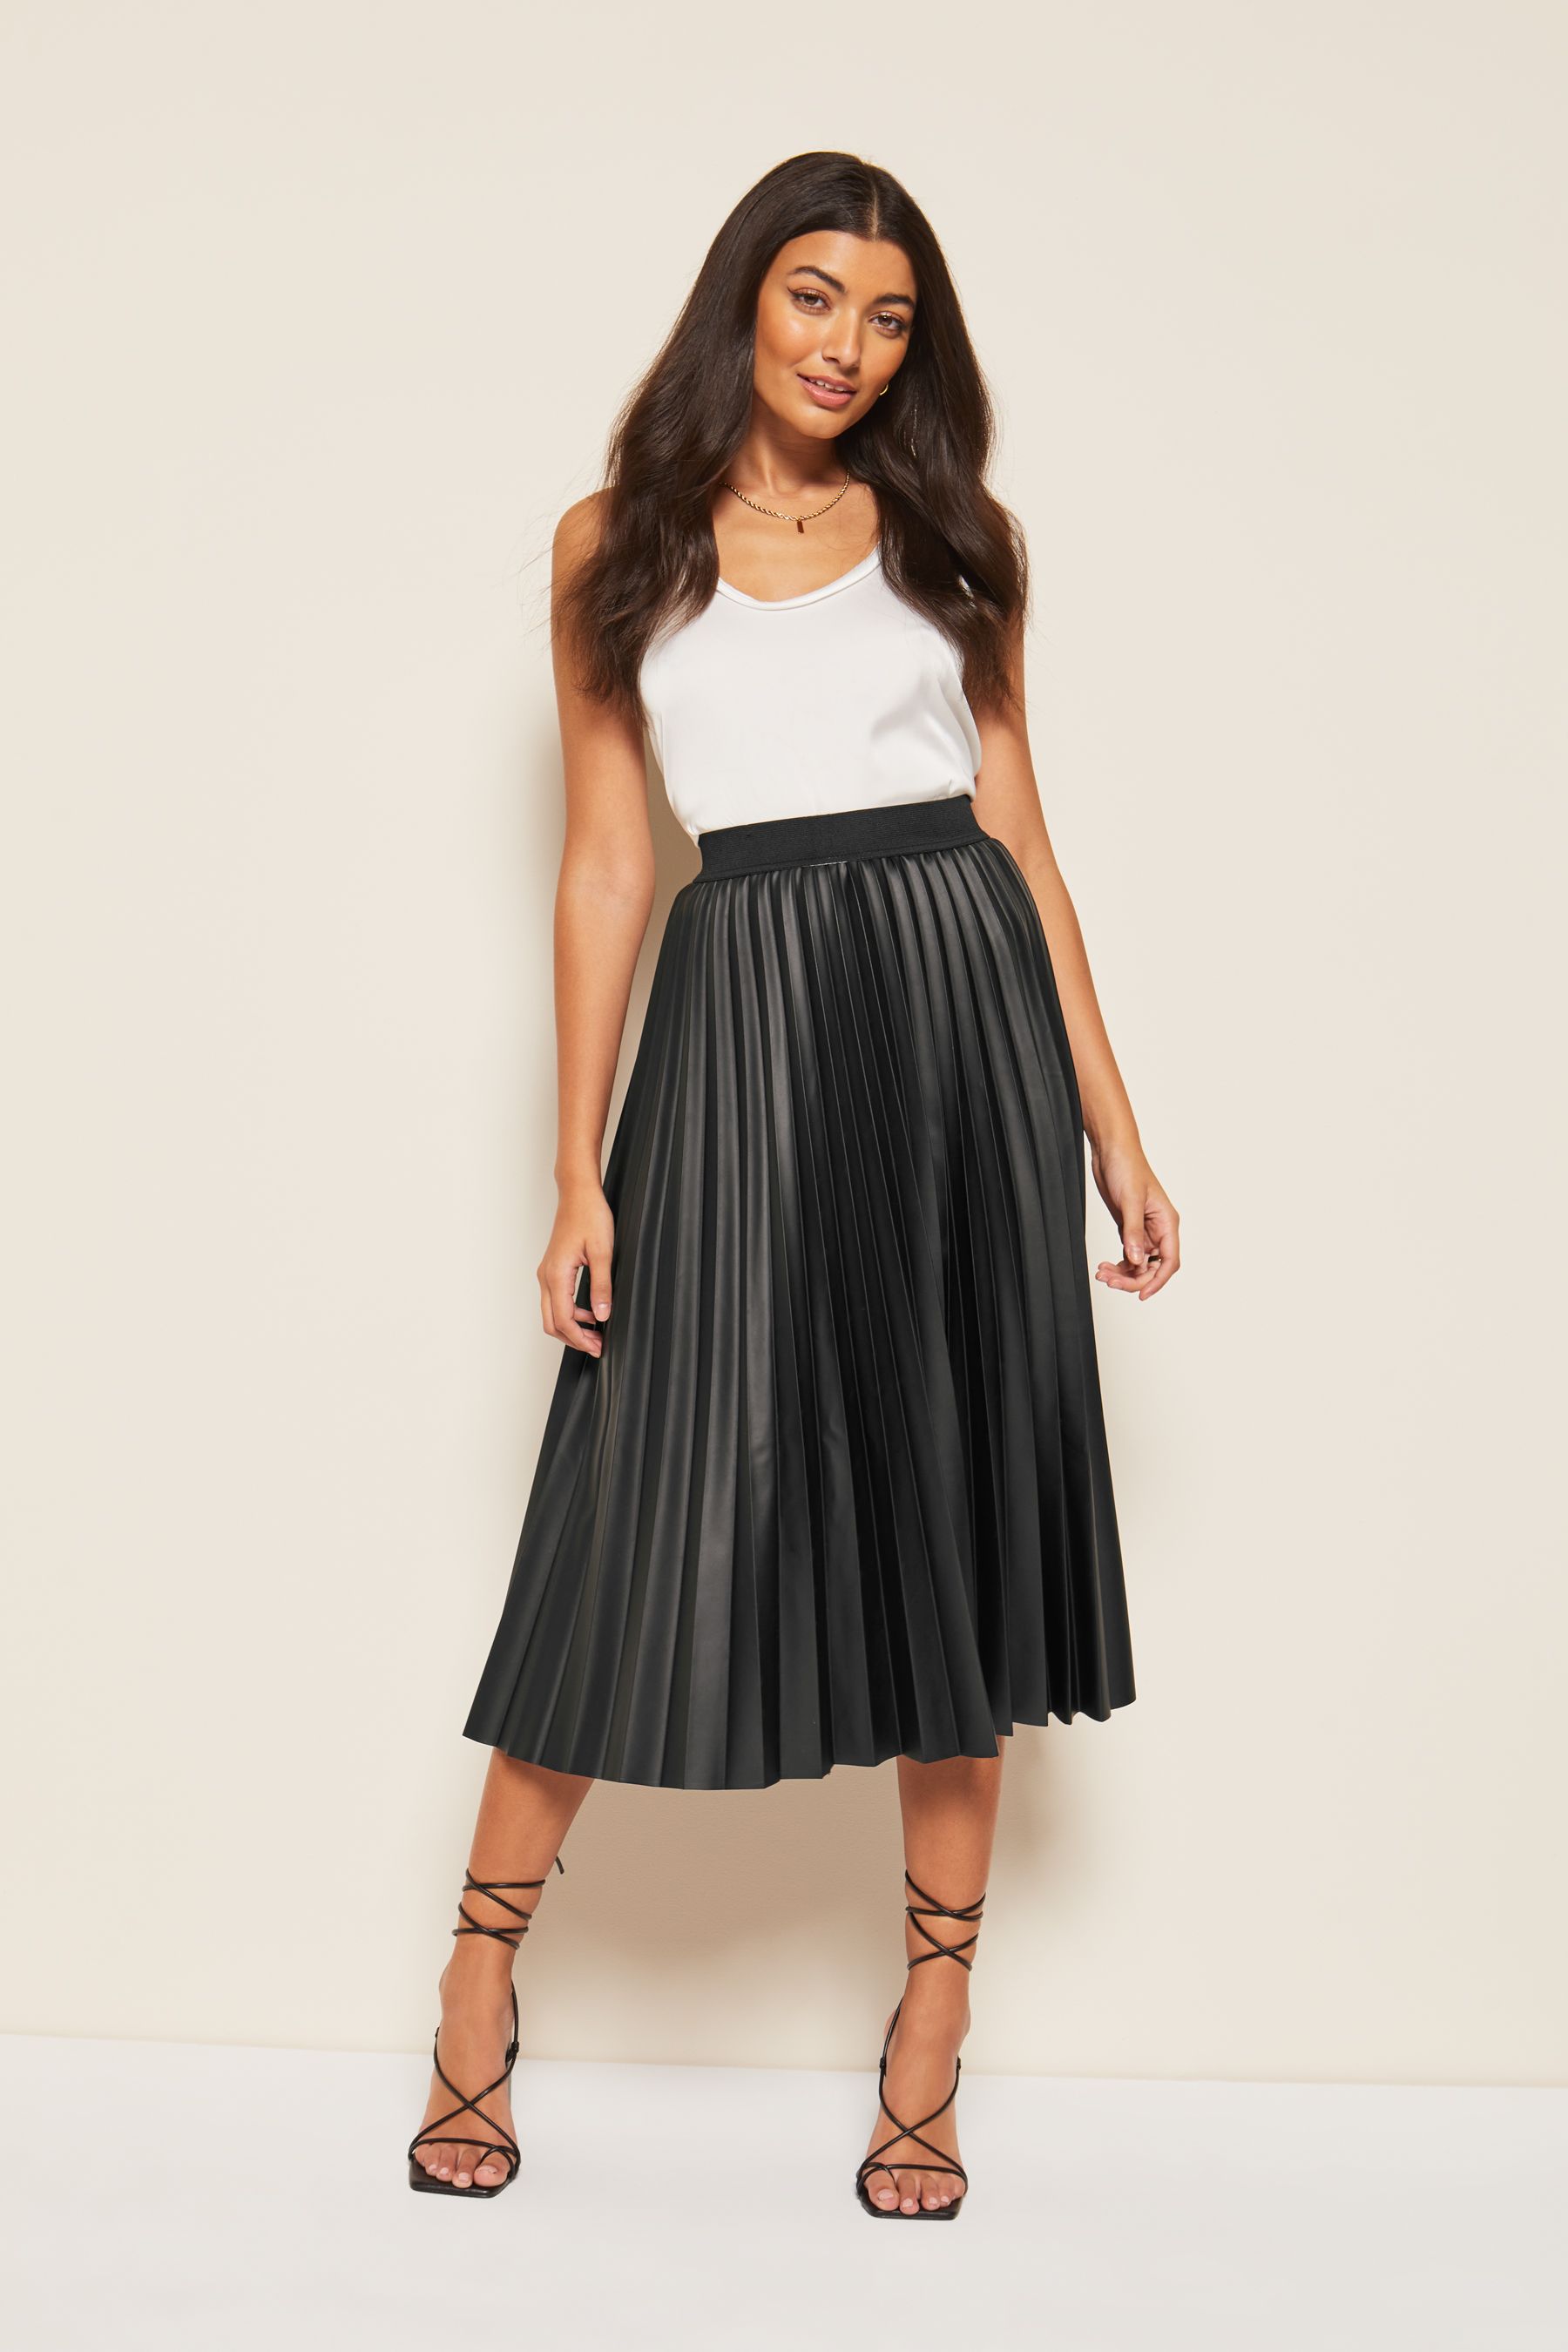 Buy Friends Like These Pleat Summer Midi Skirt from Next Ireland